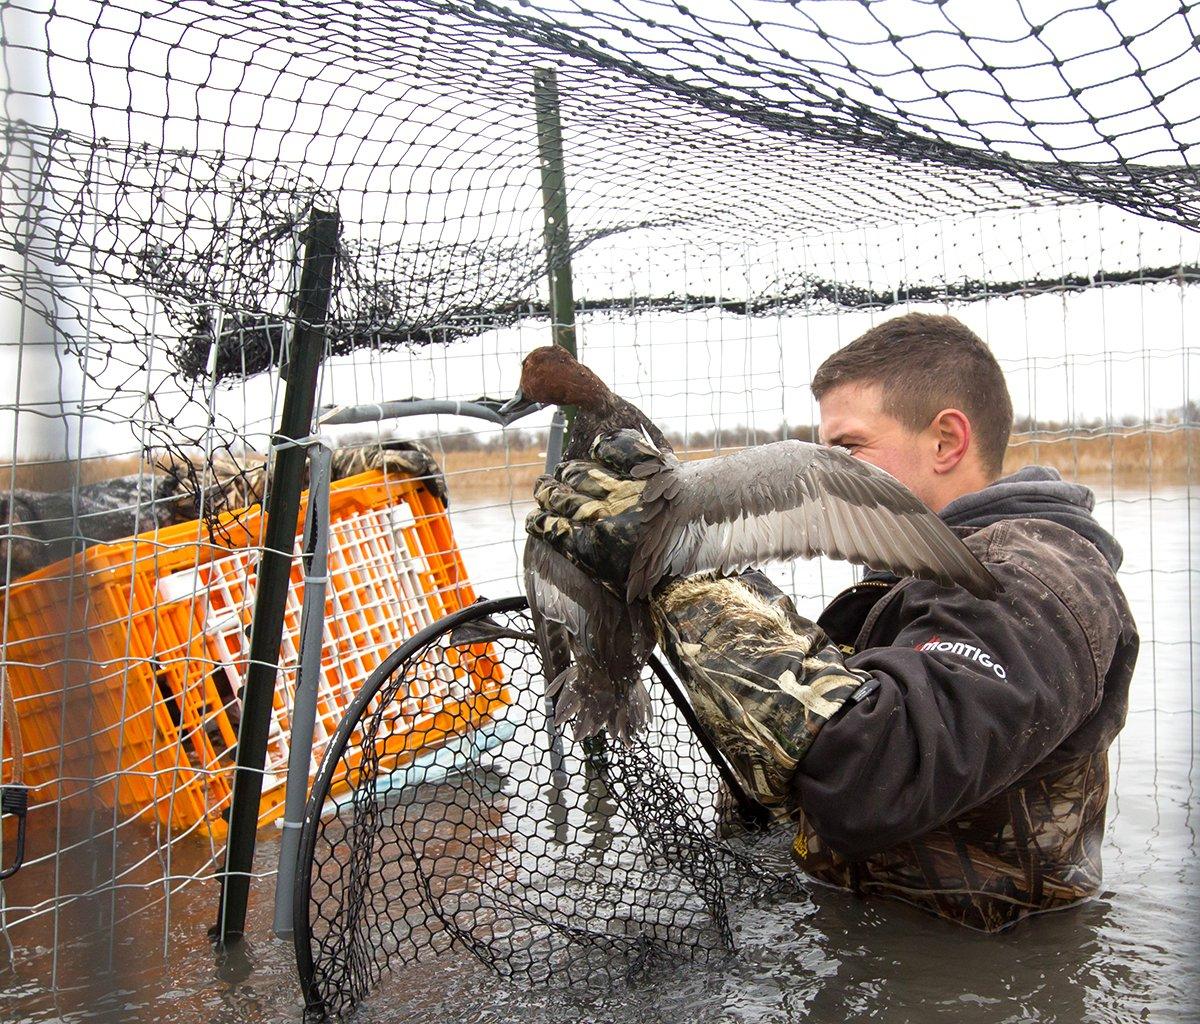 Information from banding is critical for monitoring waterfowl populations and establishing hunting seasons. Photo courtesy of Delta Waterfowl